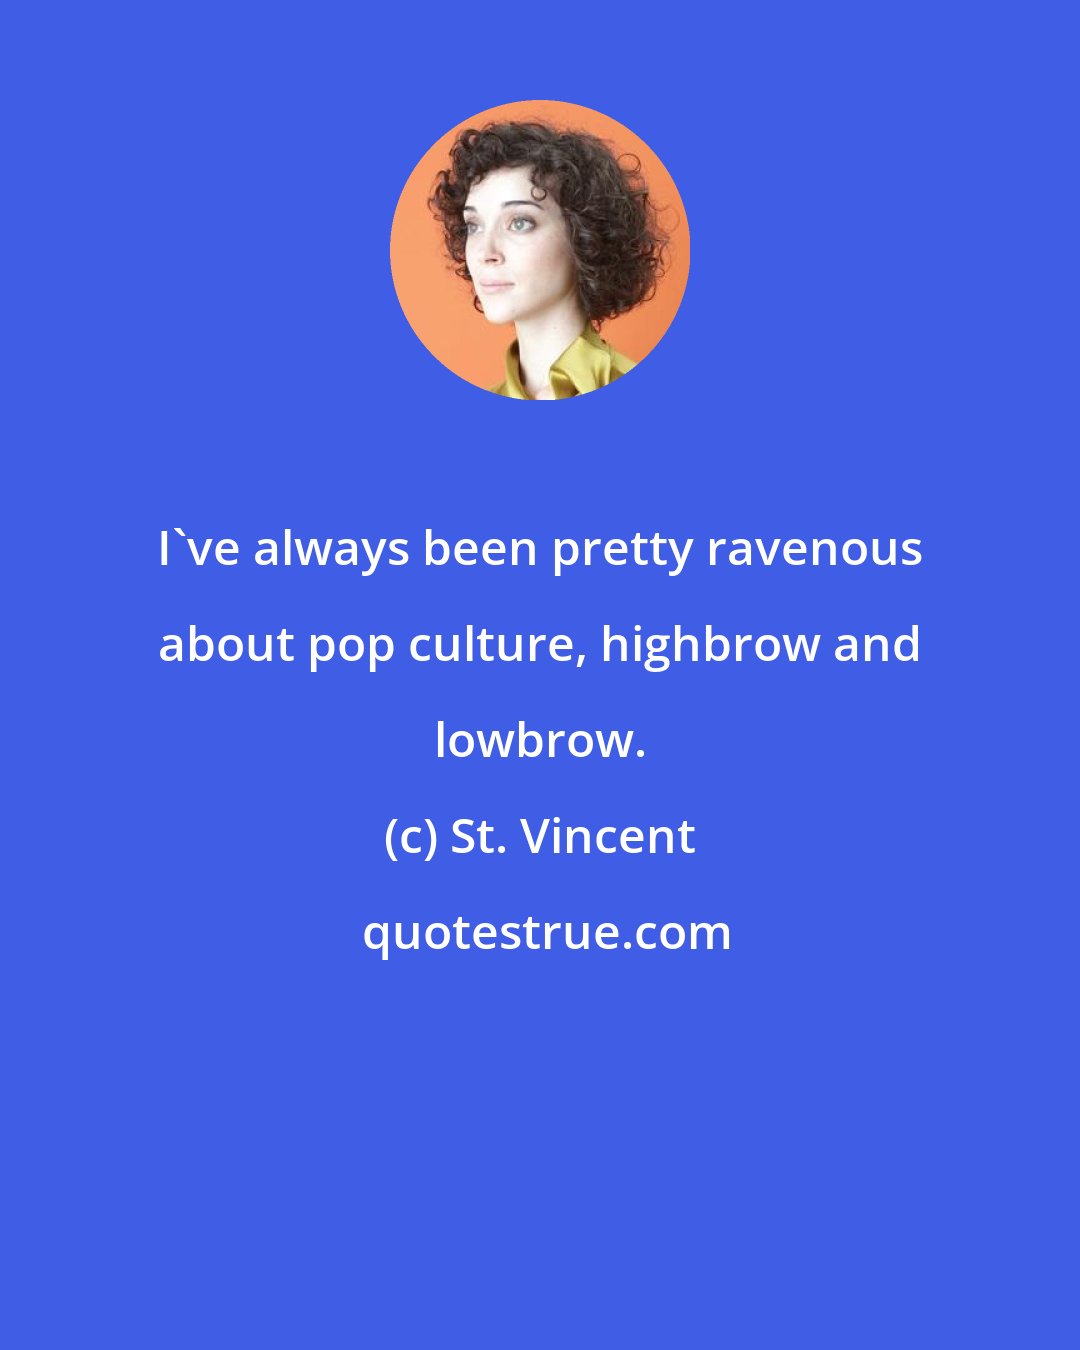 St. Vincent: I've always been pretty ravenous about pop culture, highbrow and lowbrow.